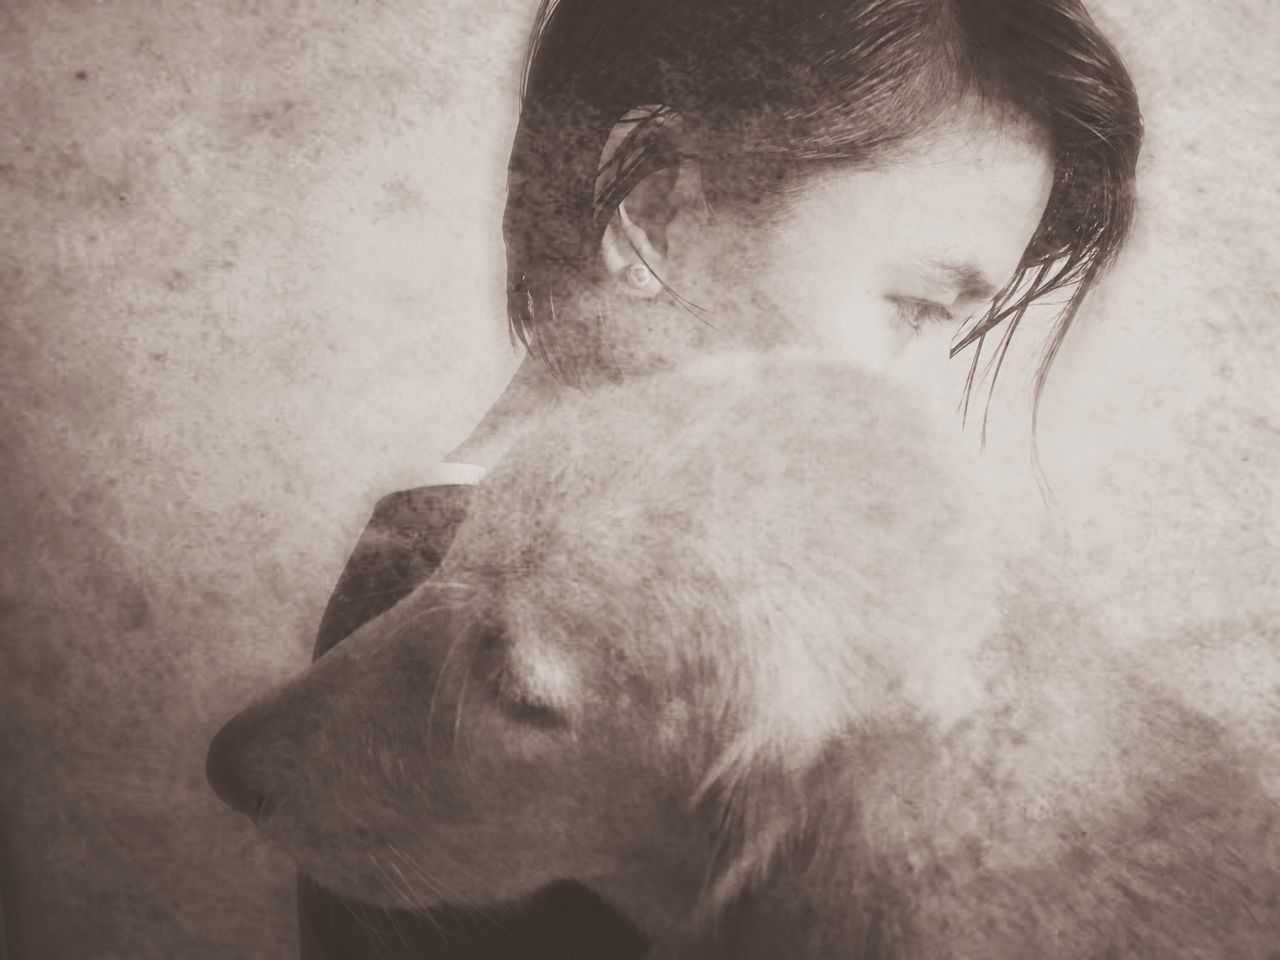 Close-up of woman with dog